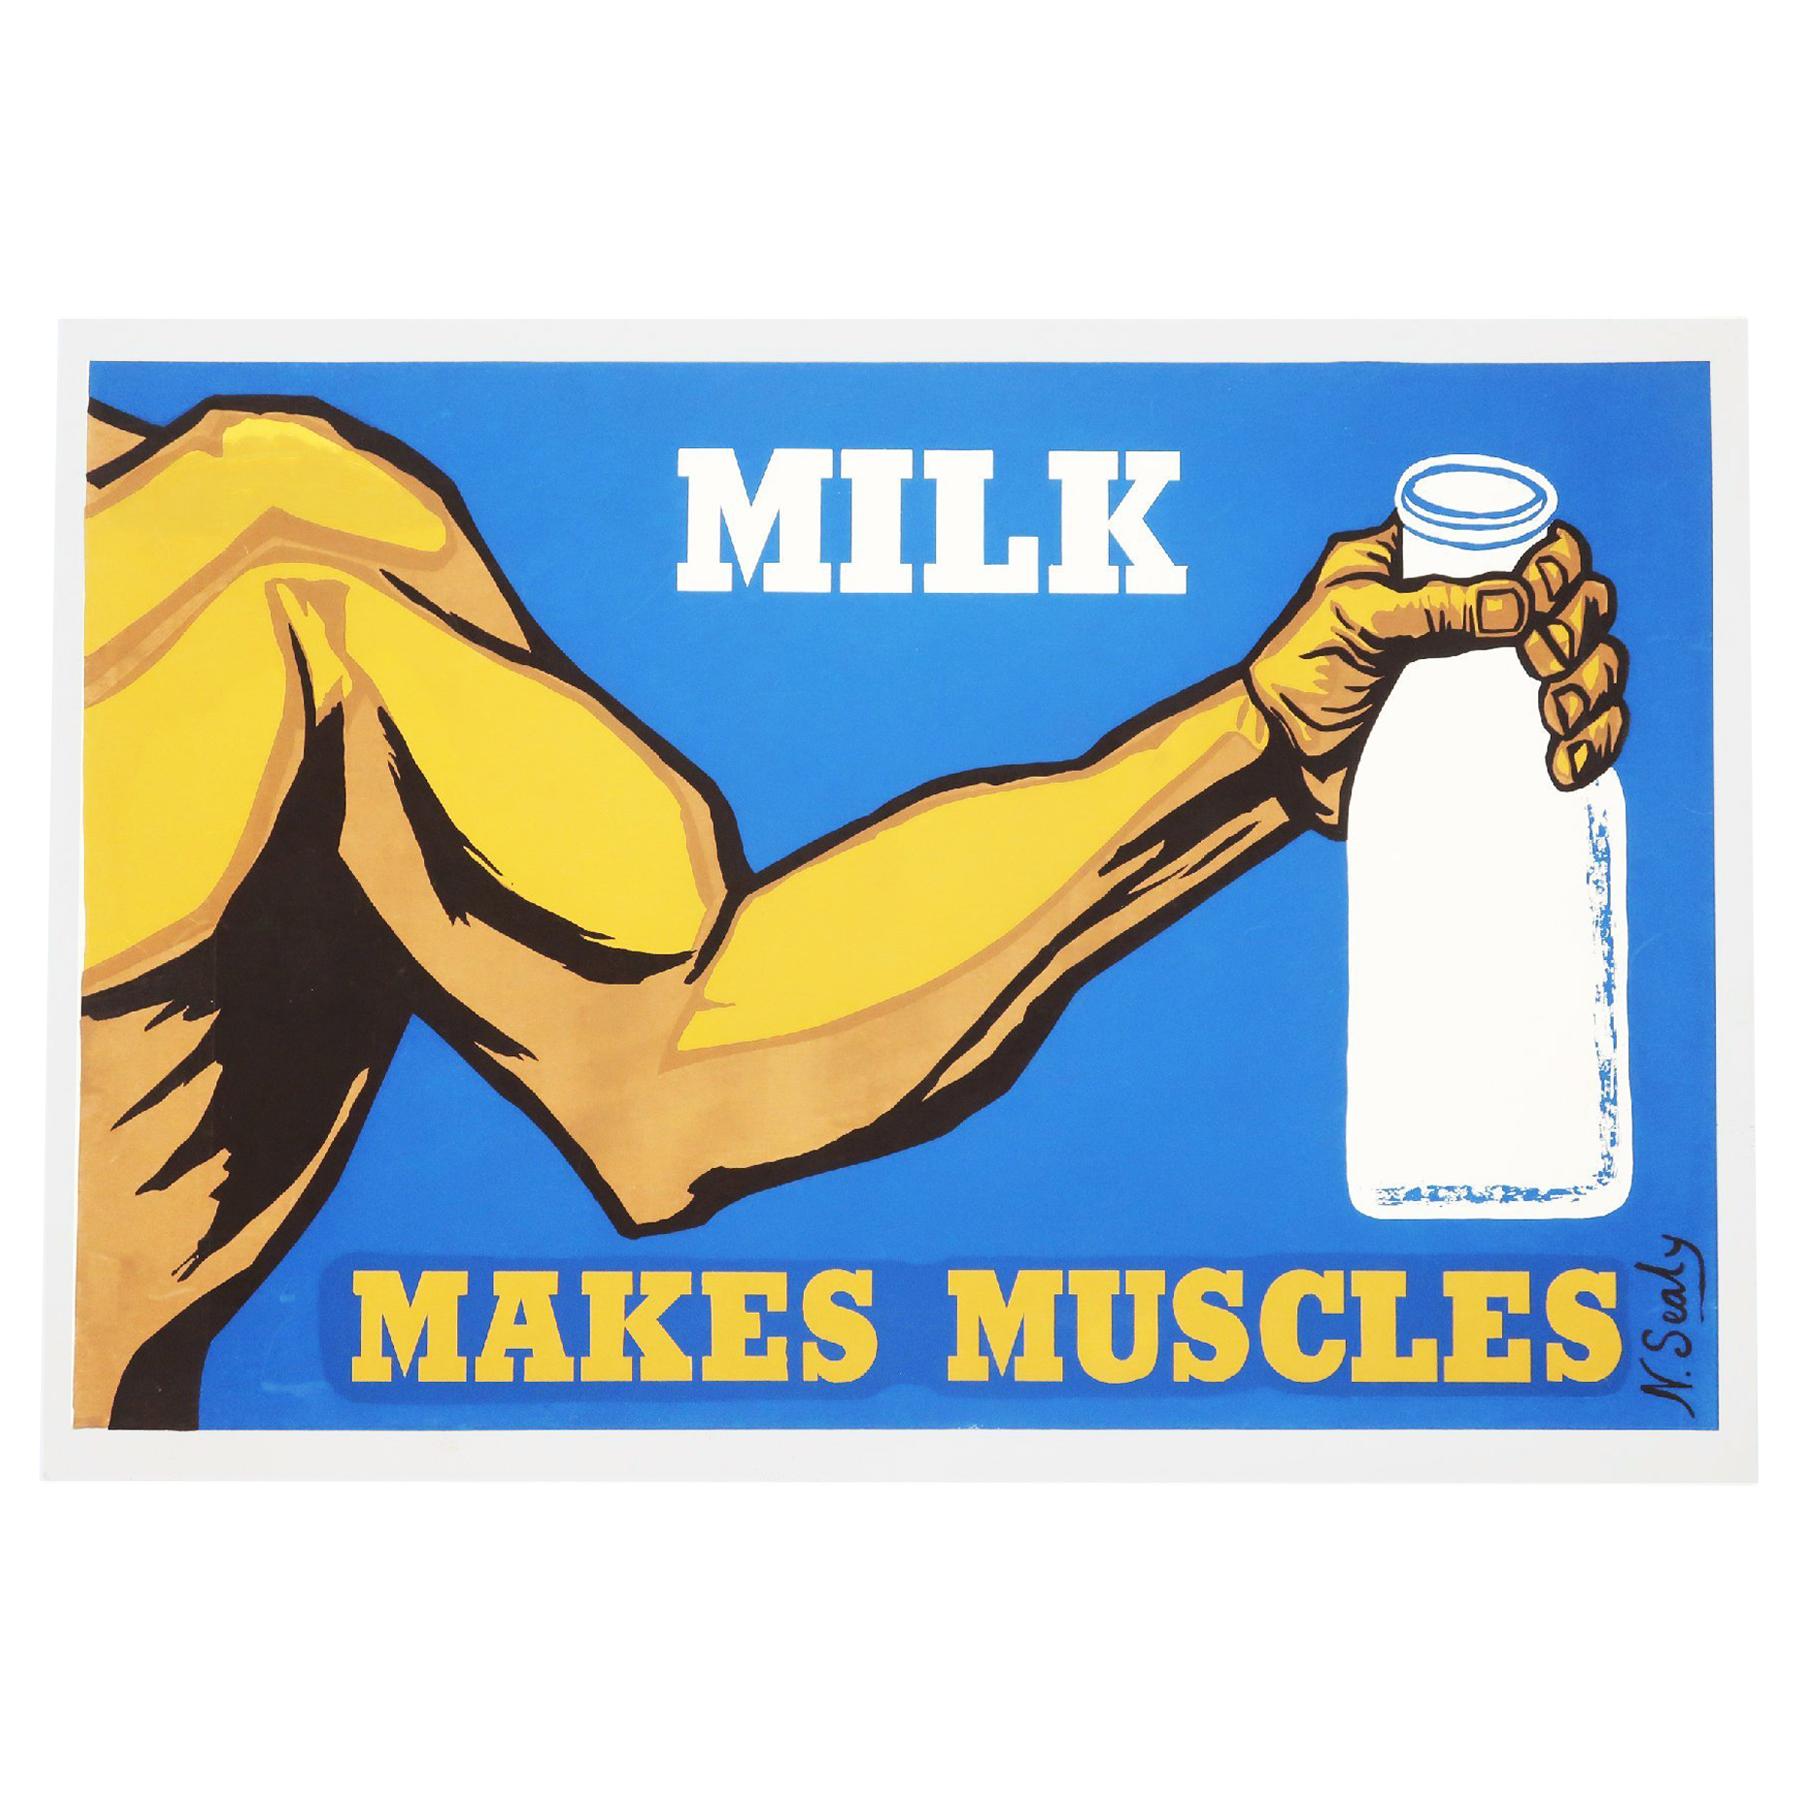 Vintage "Milk Makes Muscles" Serigraph by N. Sealy